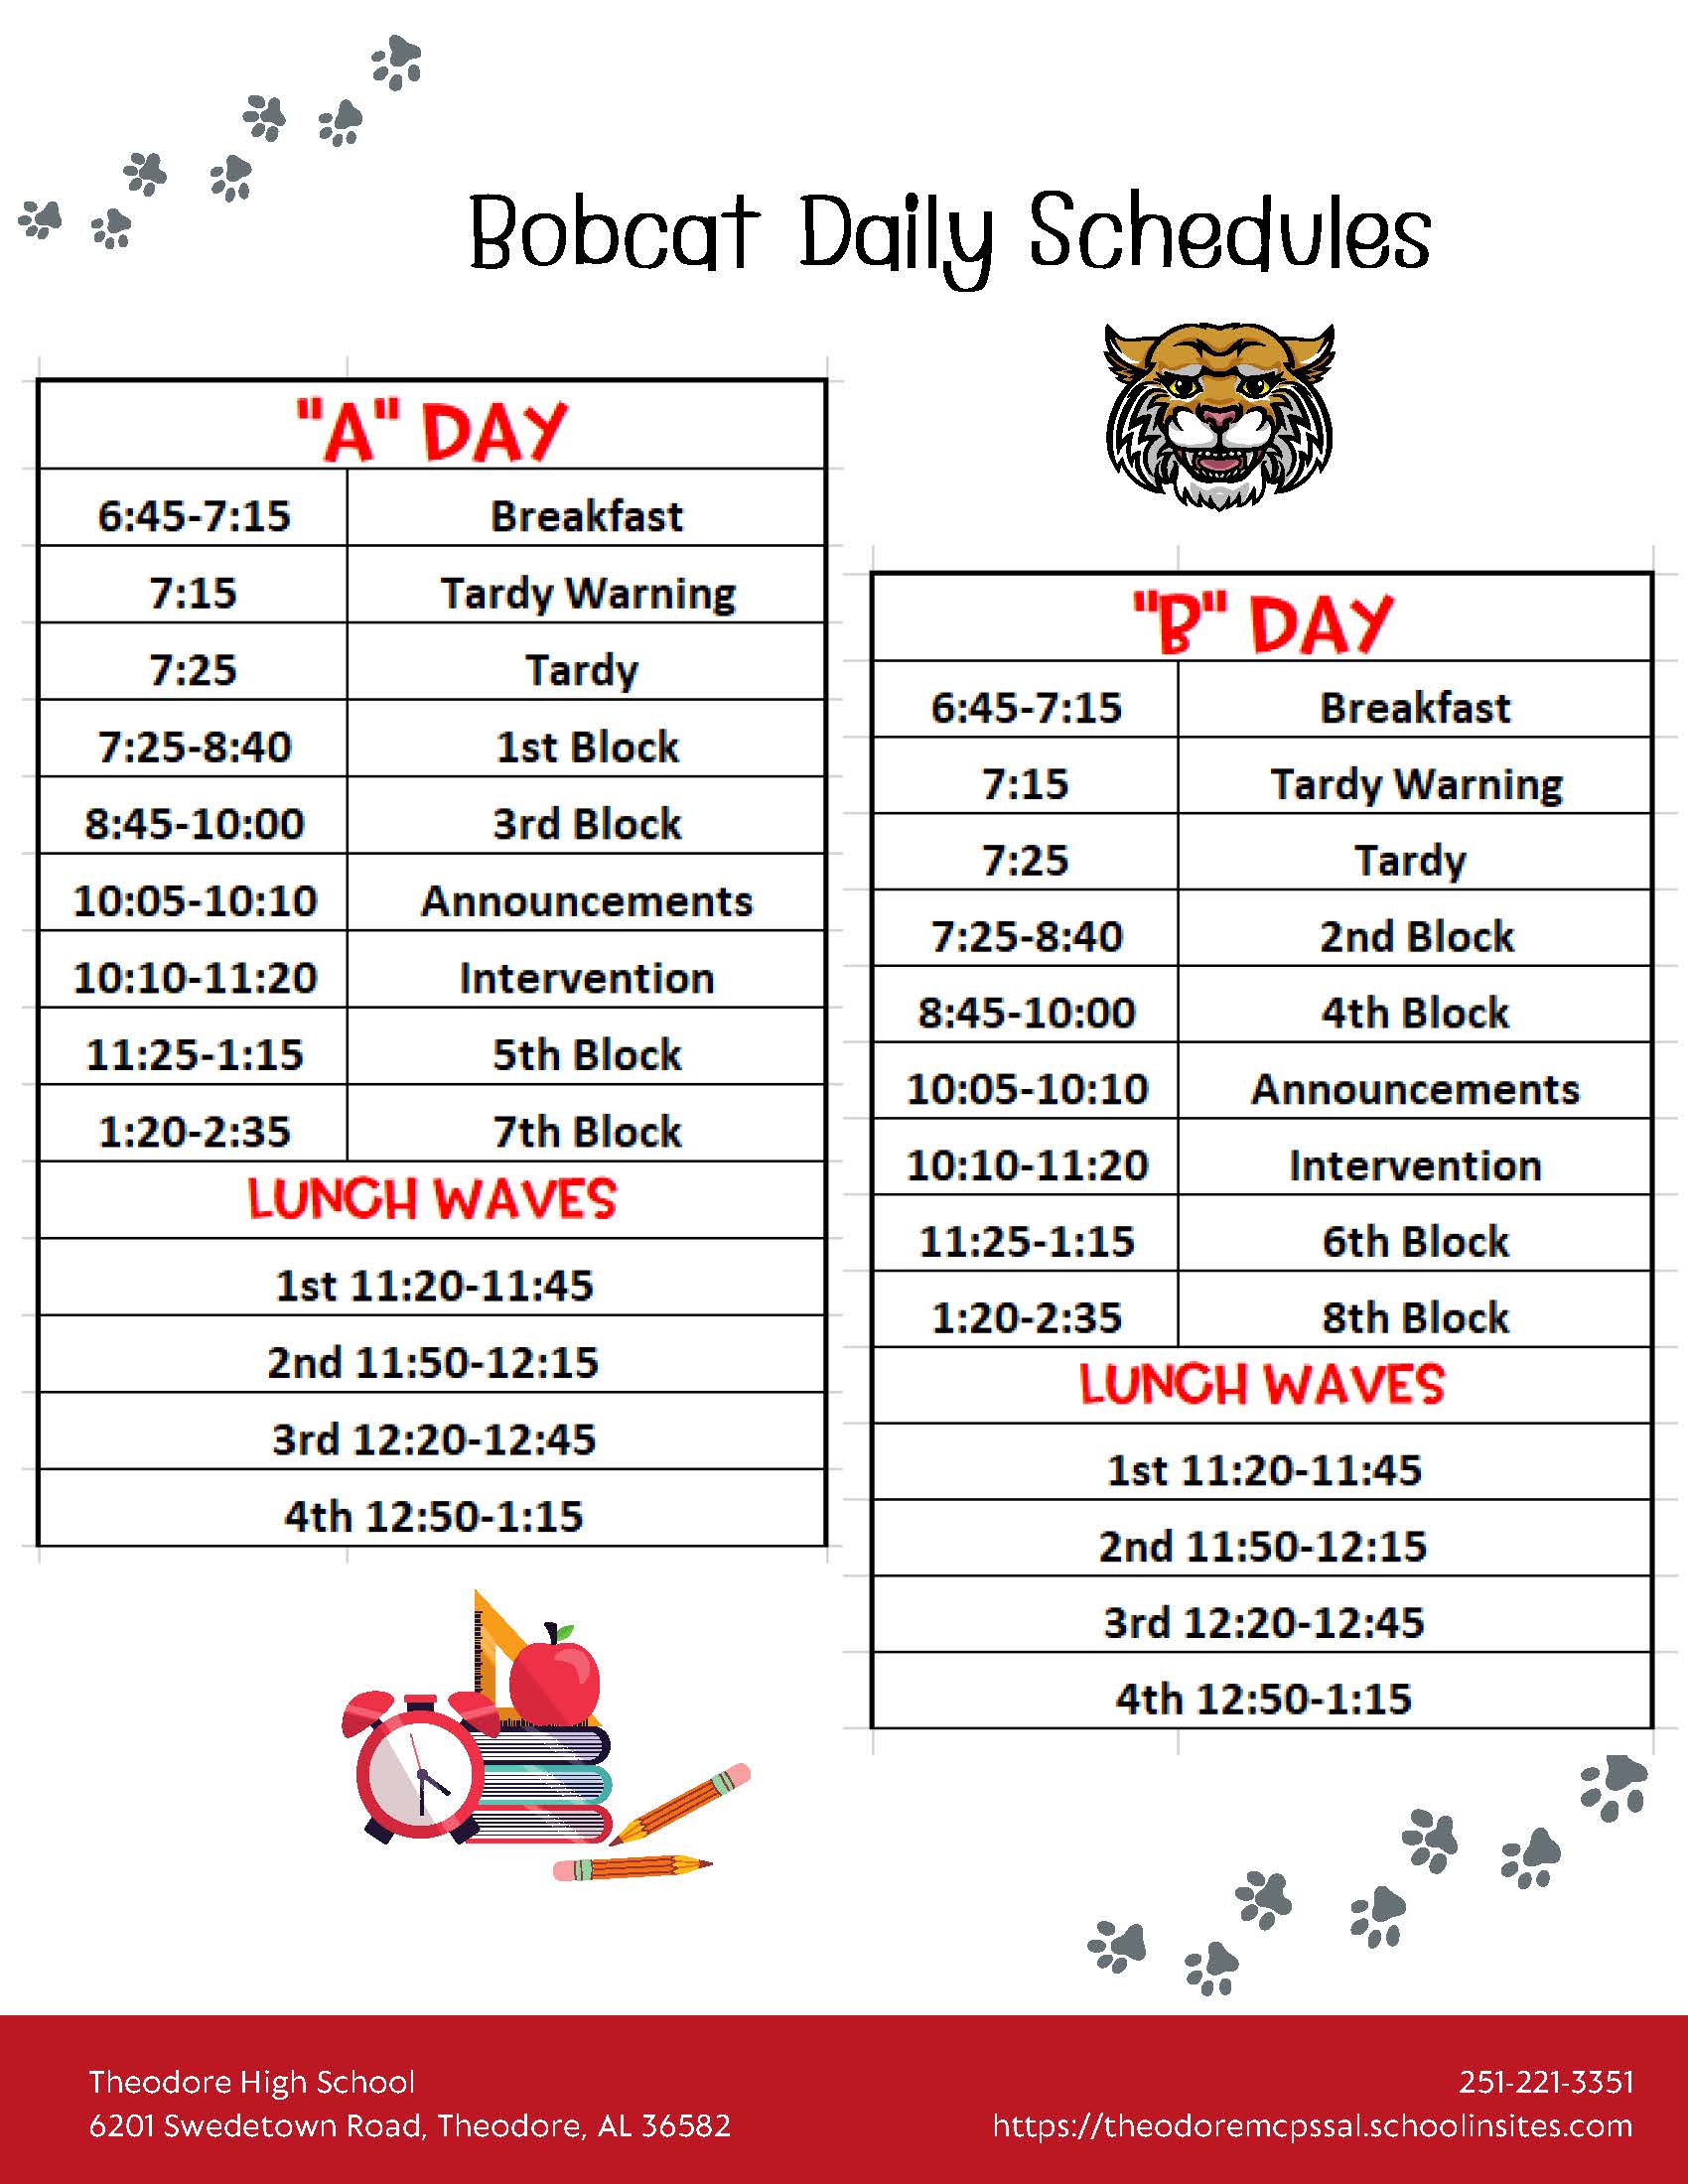 Bobcat Daily Schedules